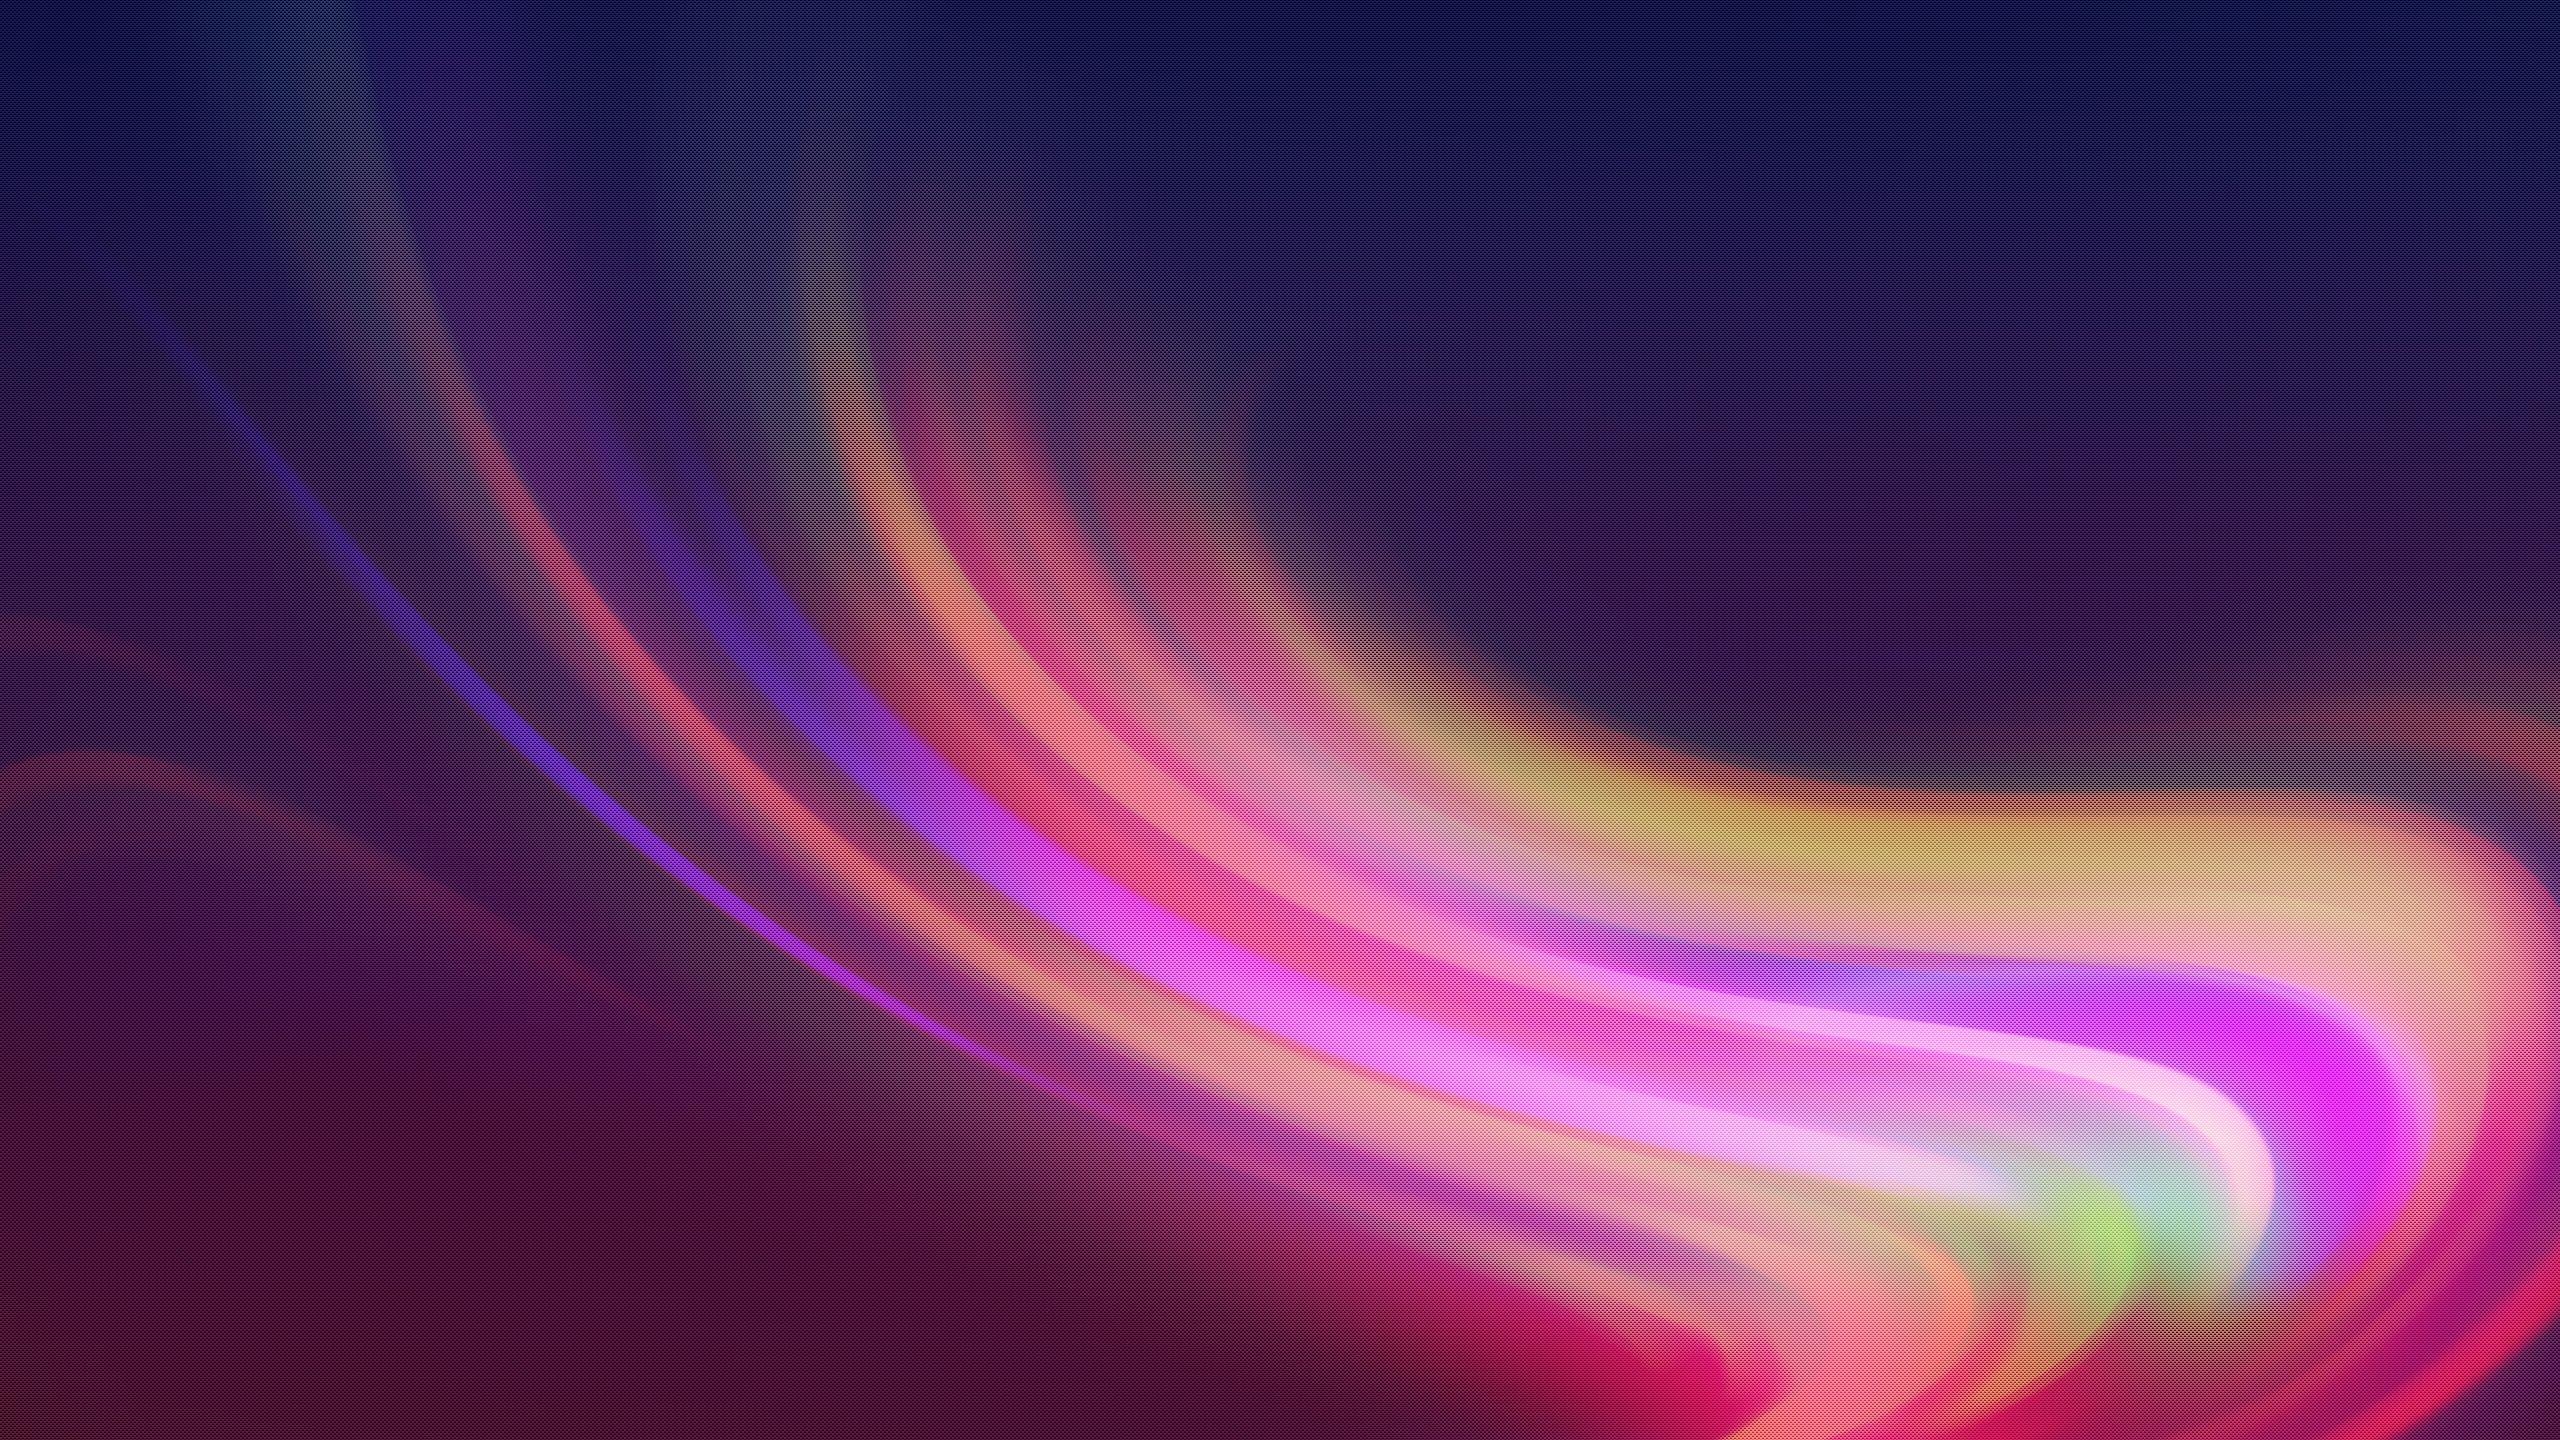 Colorful Curves Wallpaper in jpg format for free download